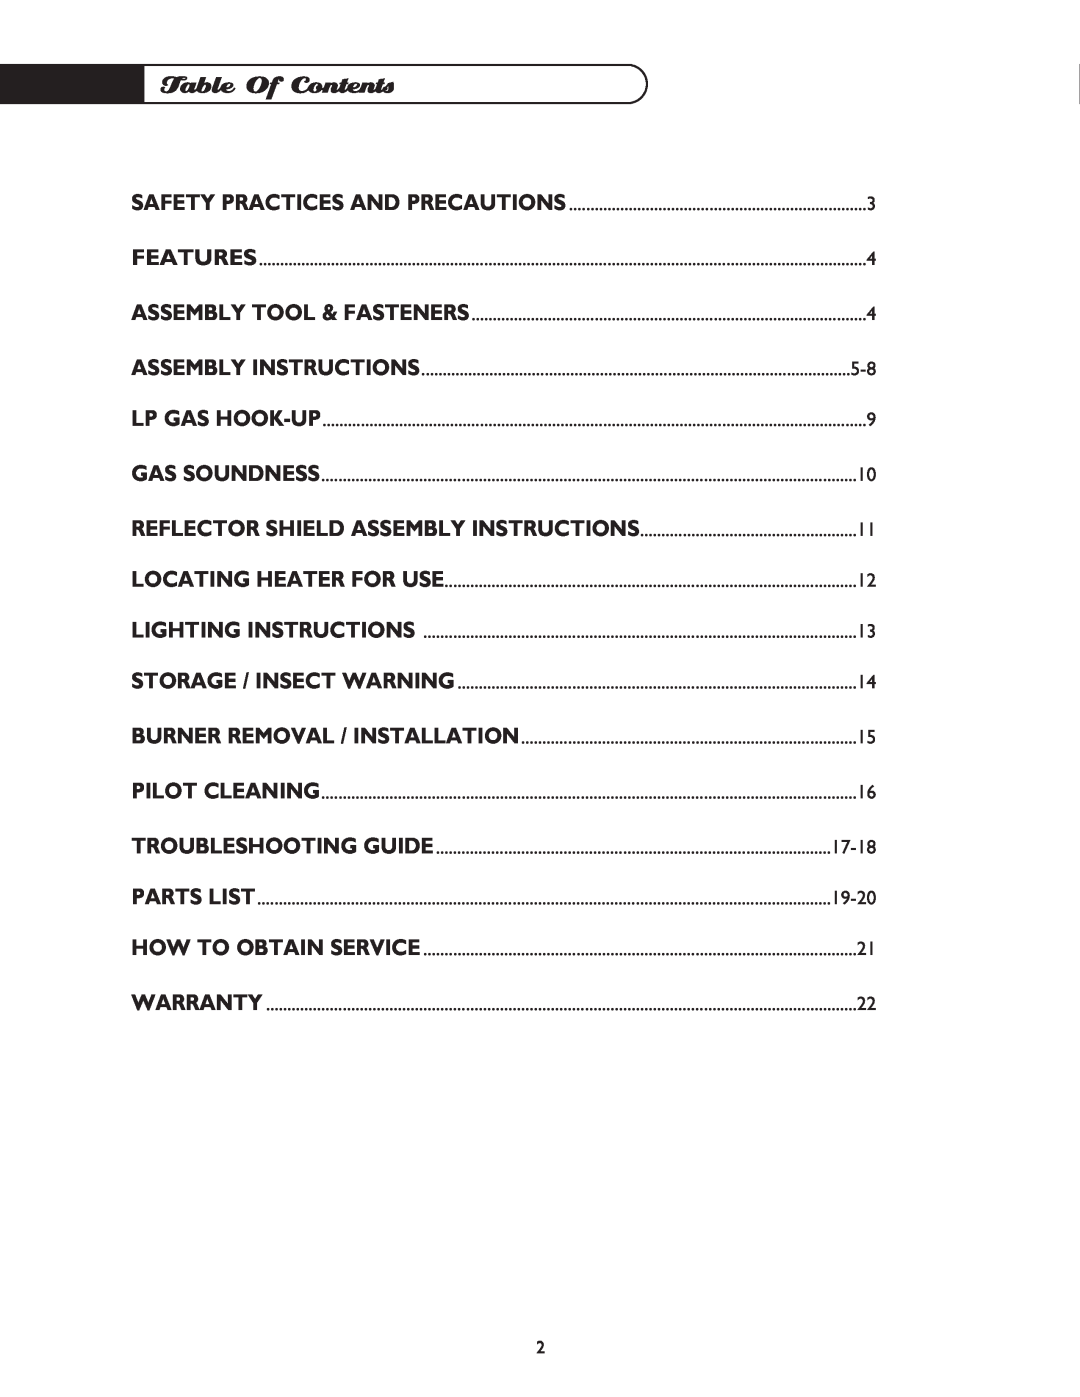 DCS PHFS-DW-SS, PHFS-DW-BK, PHFS-DWWT, PHFS-DW-BL, PHFS-DW-GN, PHFS-DW-BZ manual Table Of Contents, 17-18, 19-20 